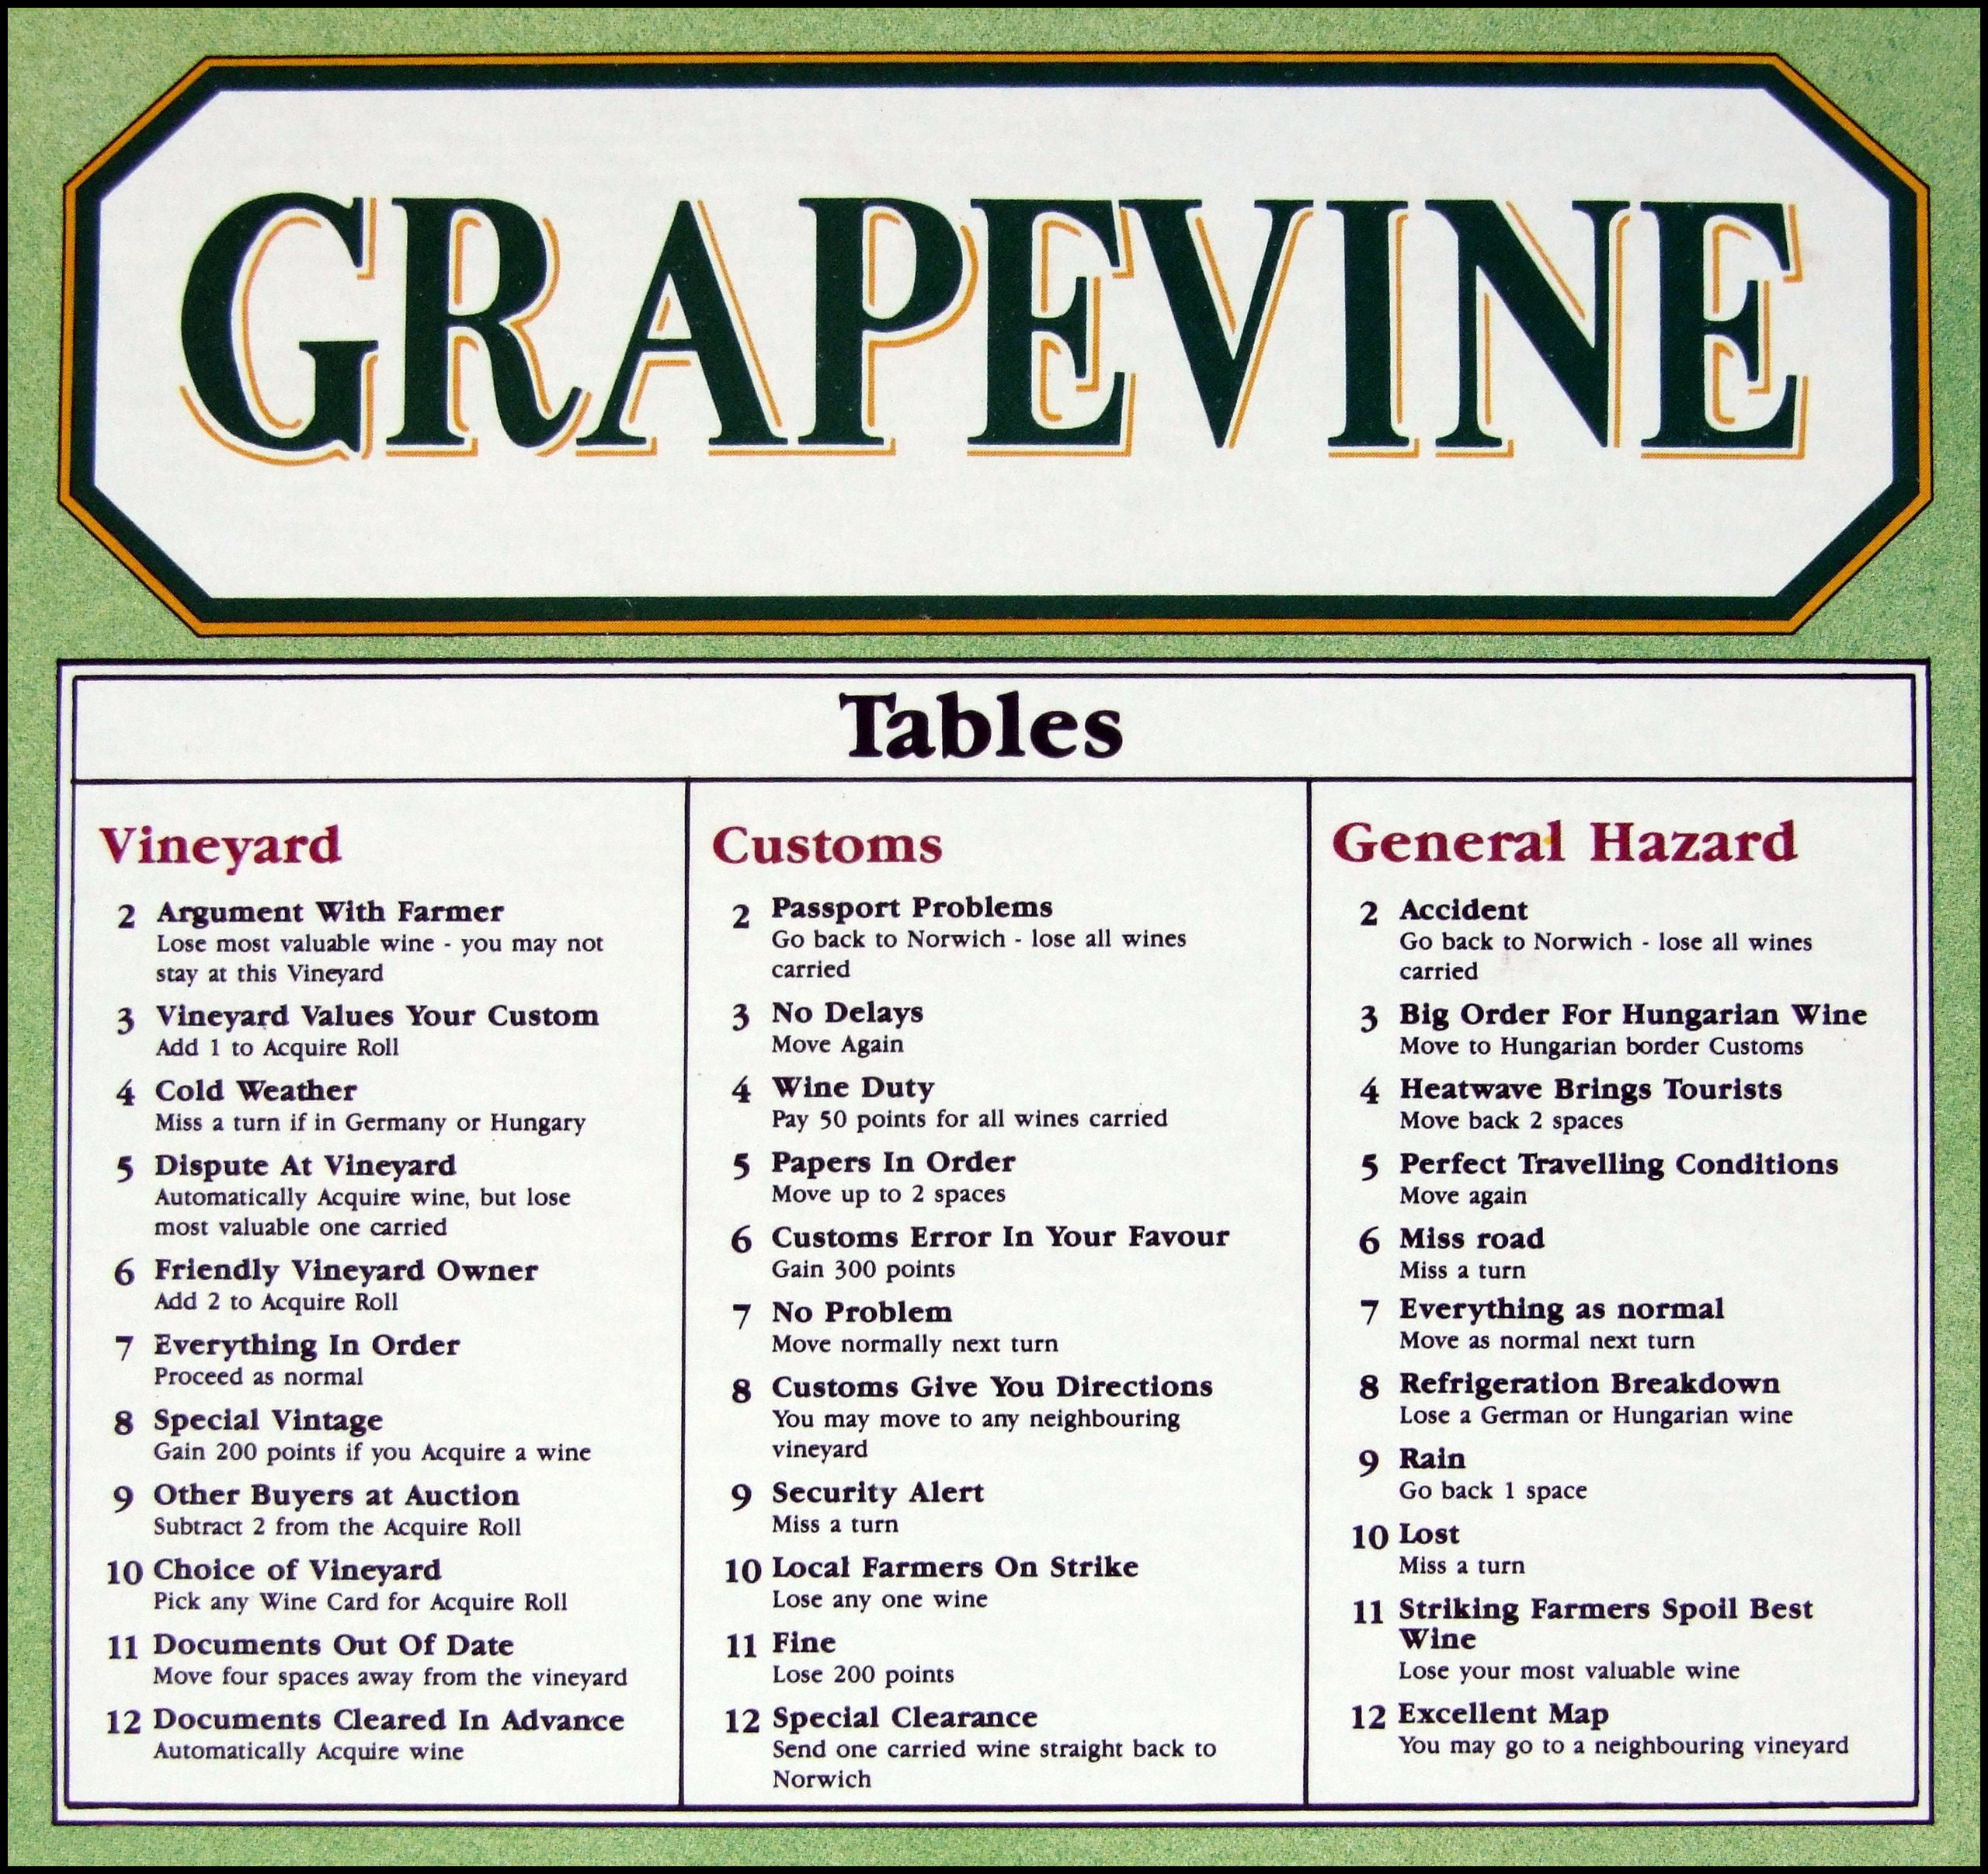 Grapevine - Event Tables